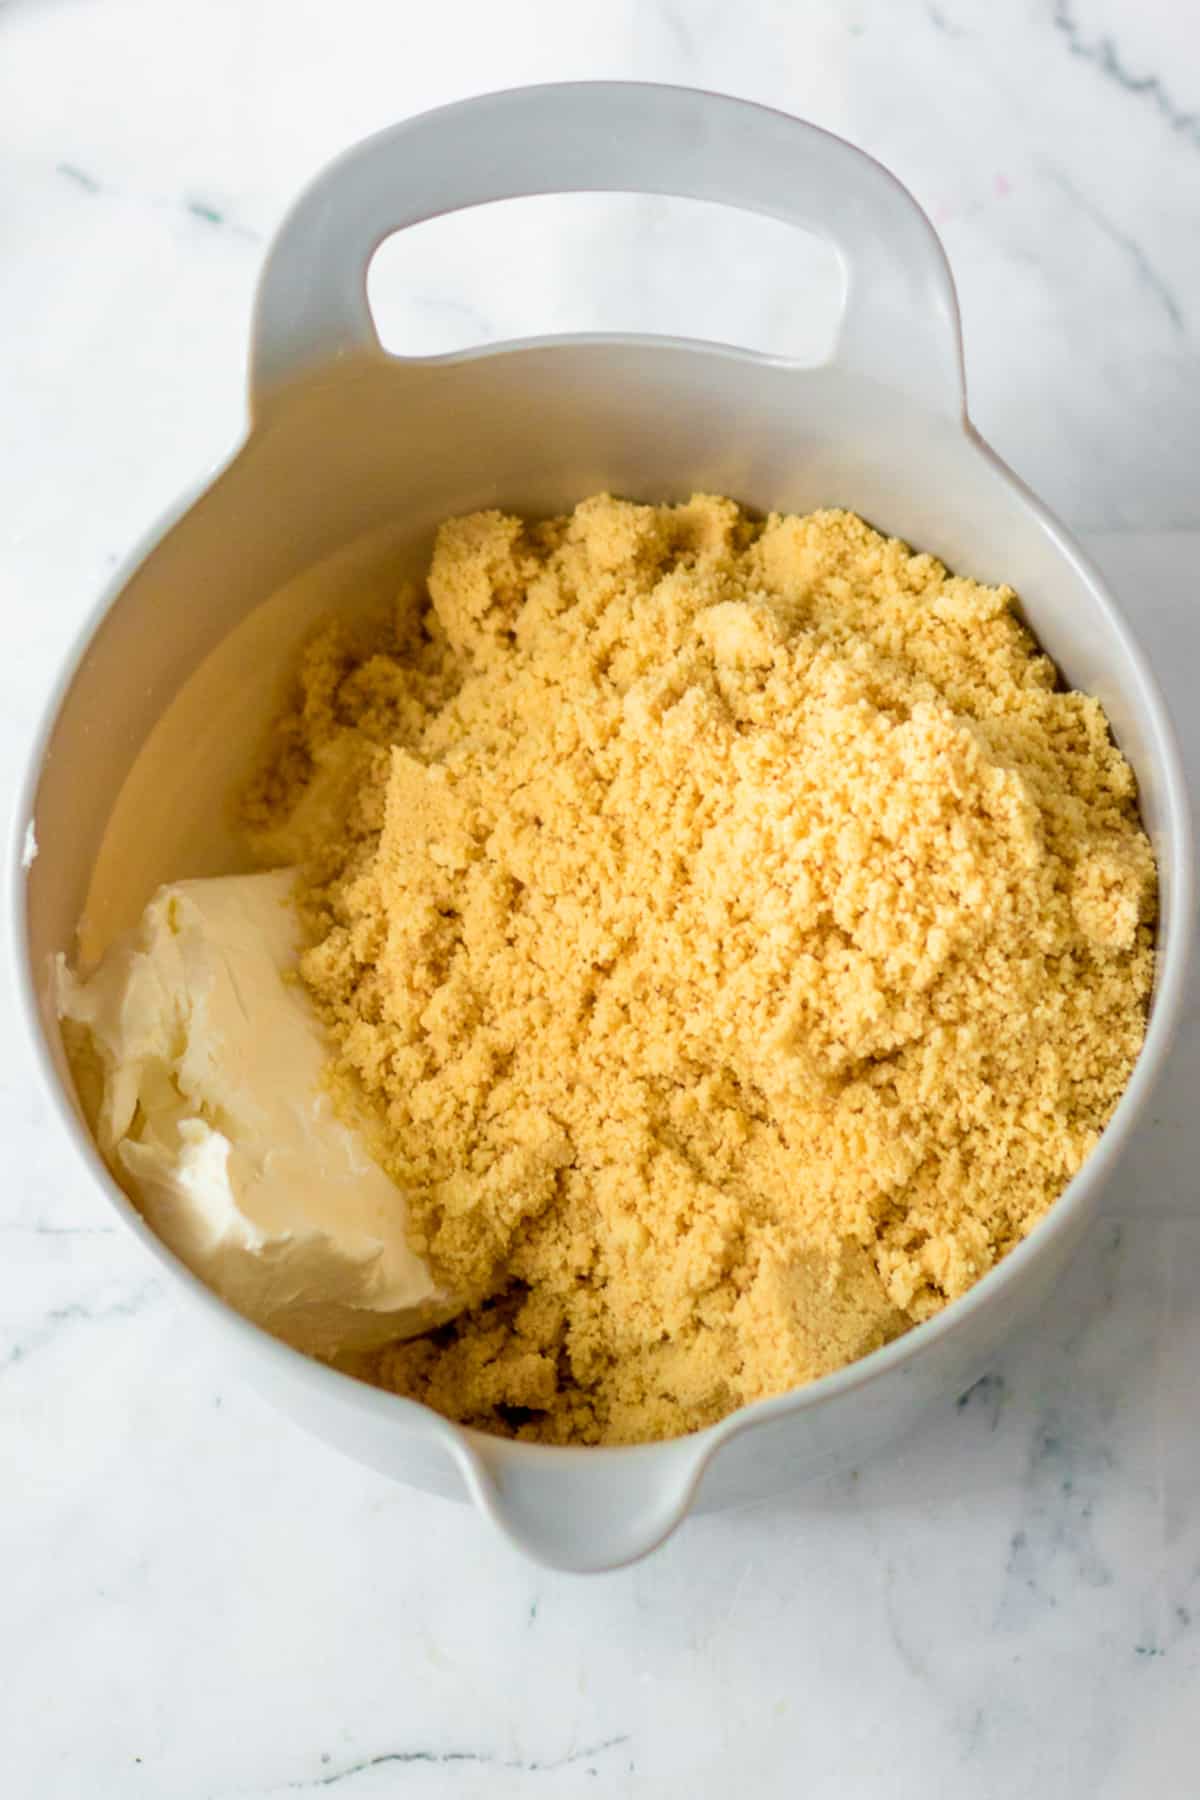 Mixing cream cheese and golden oreo cookie crumbs together in a mixing bowl from overhead on a counter.